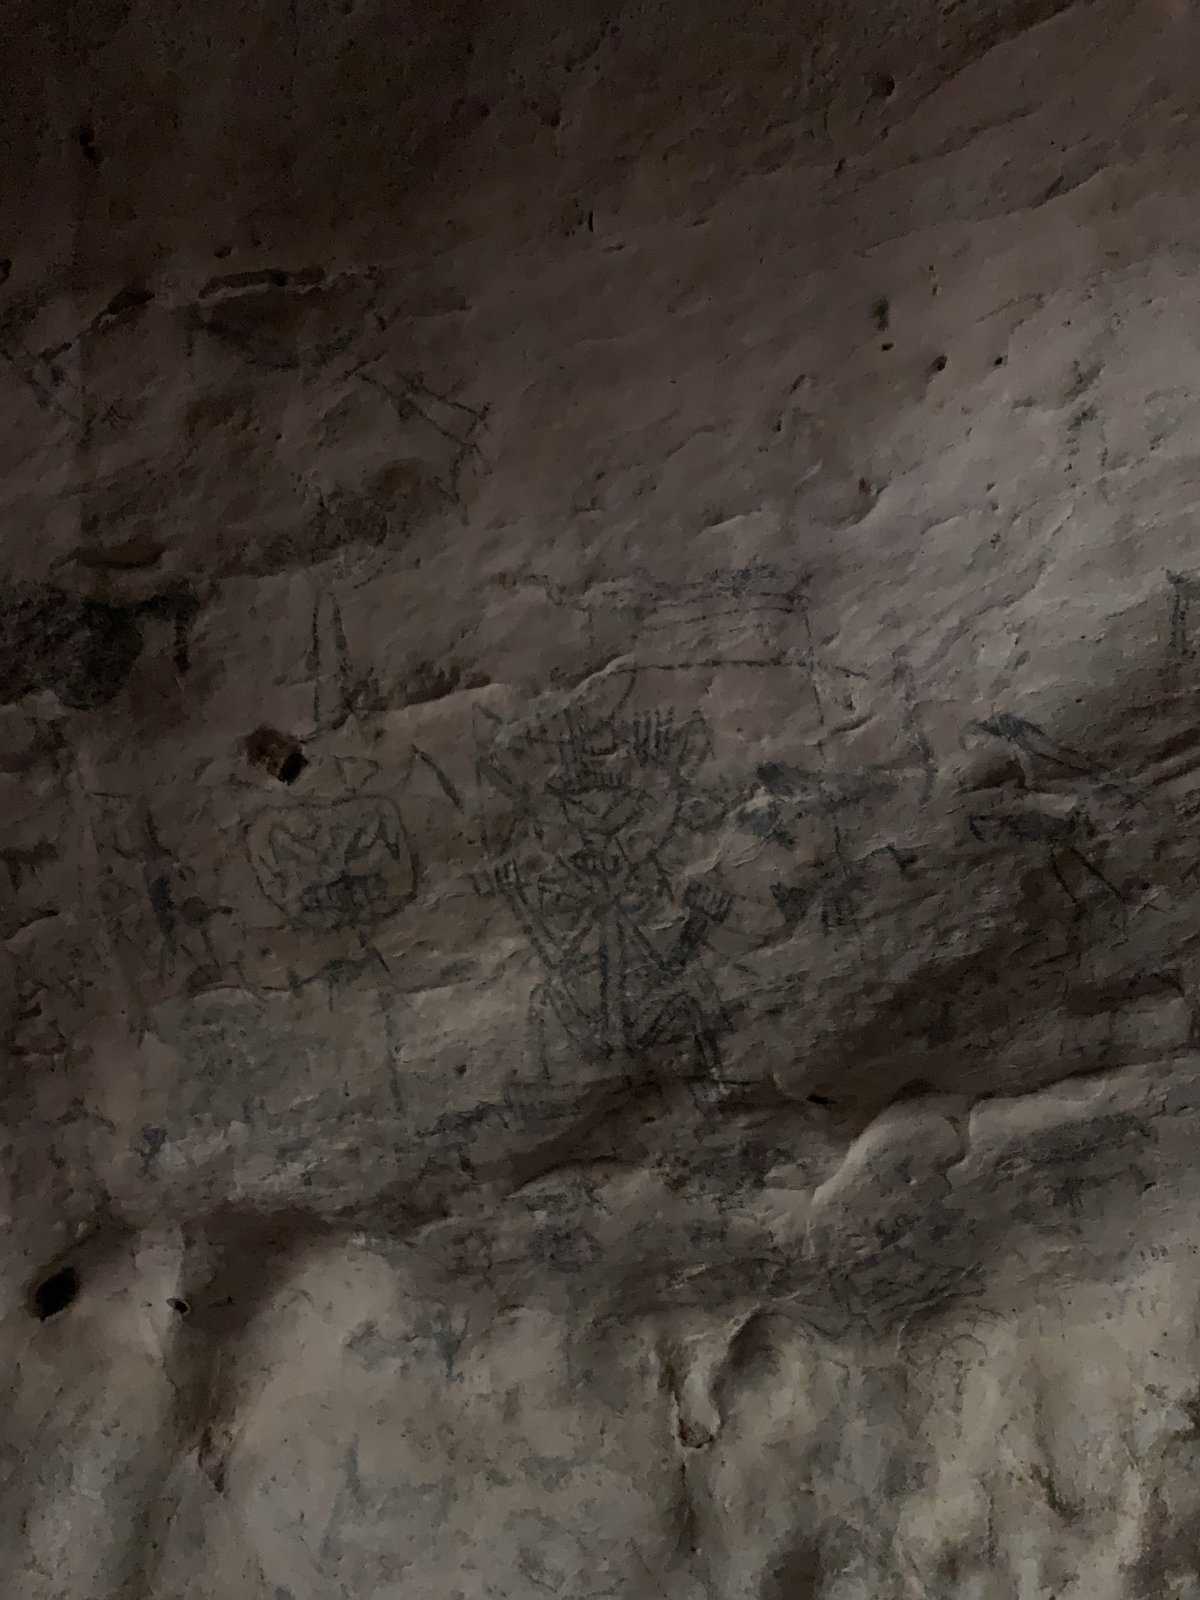 cave drawing in one of the main caves in Los Haitises.